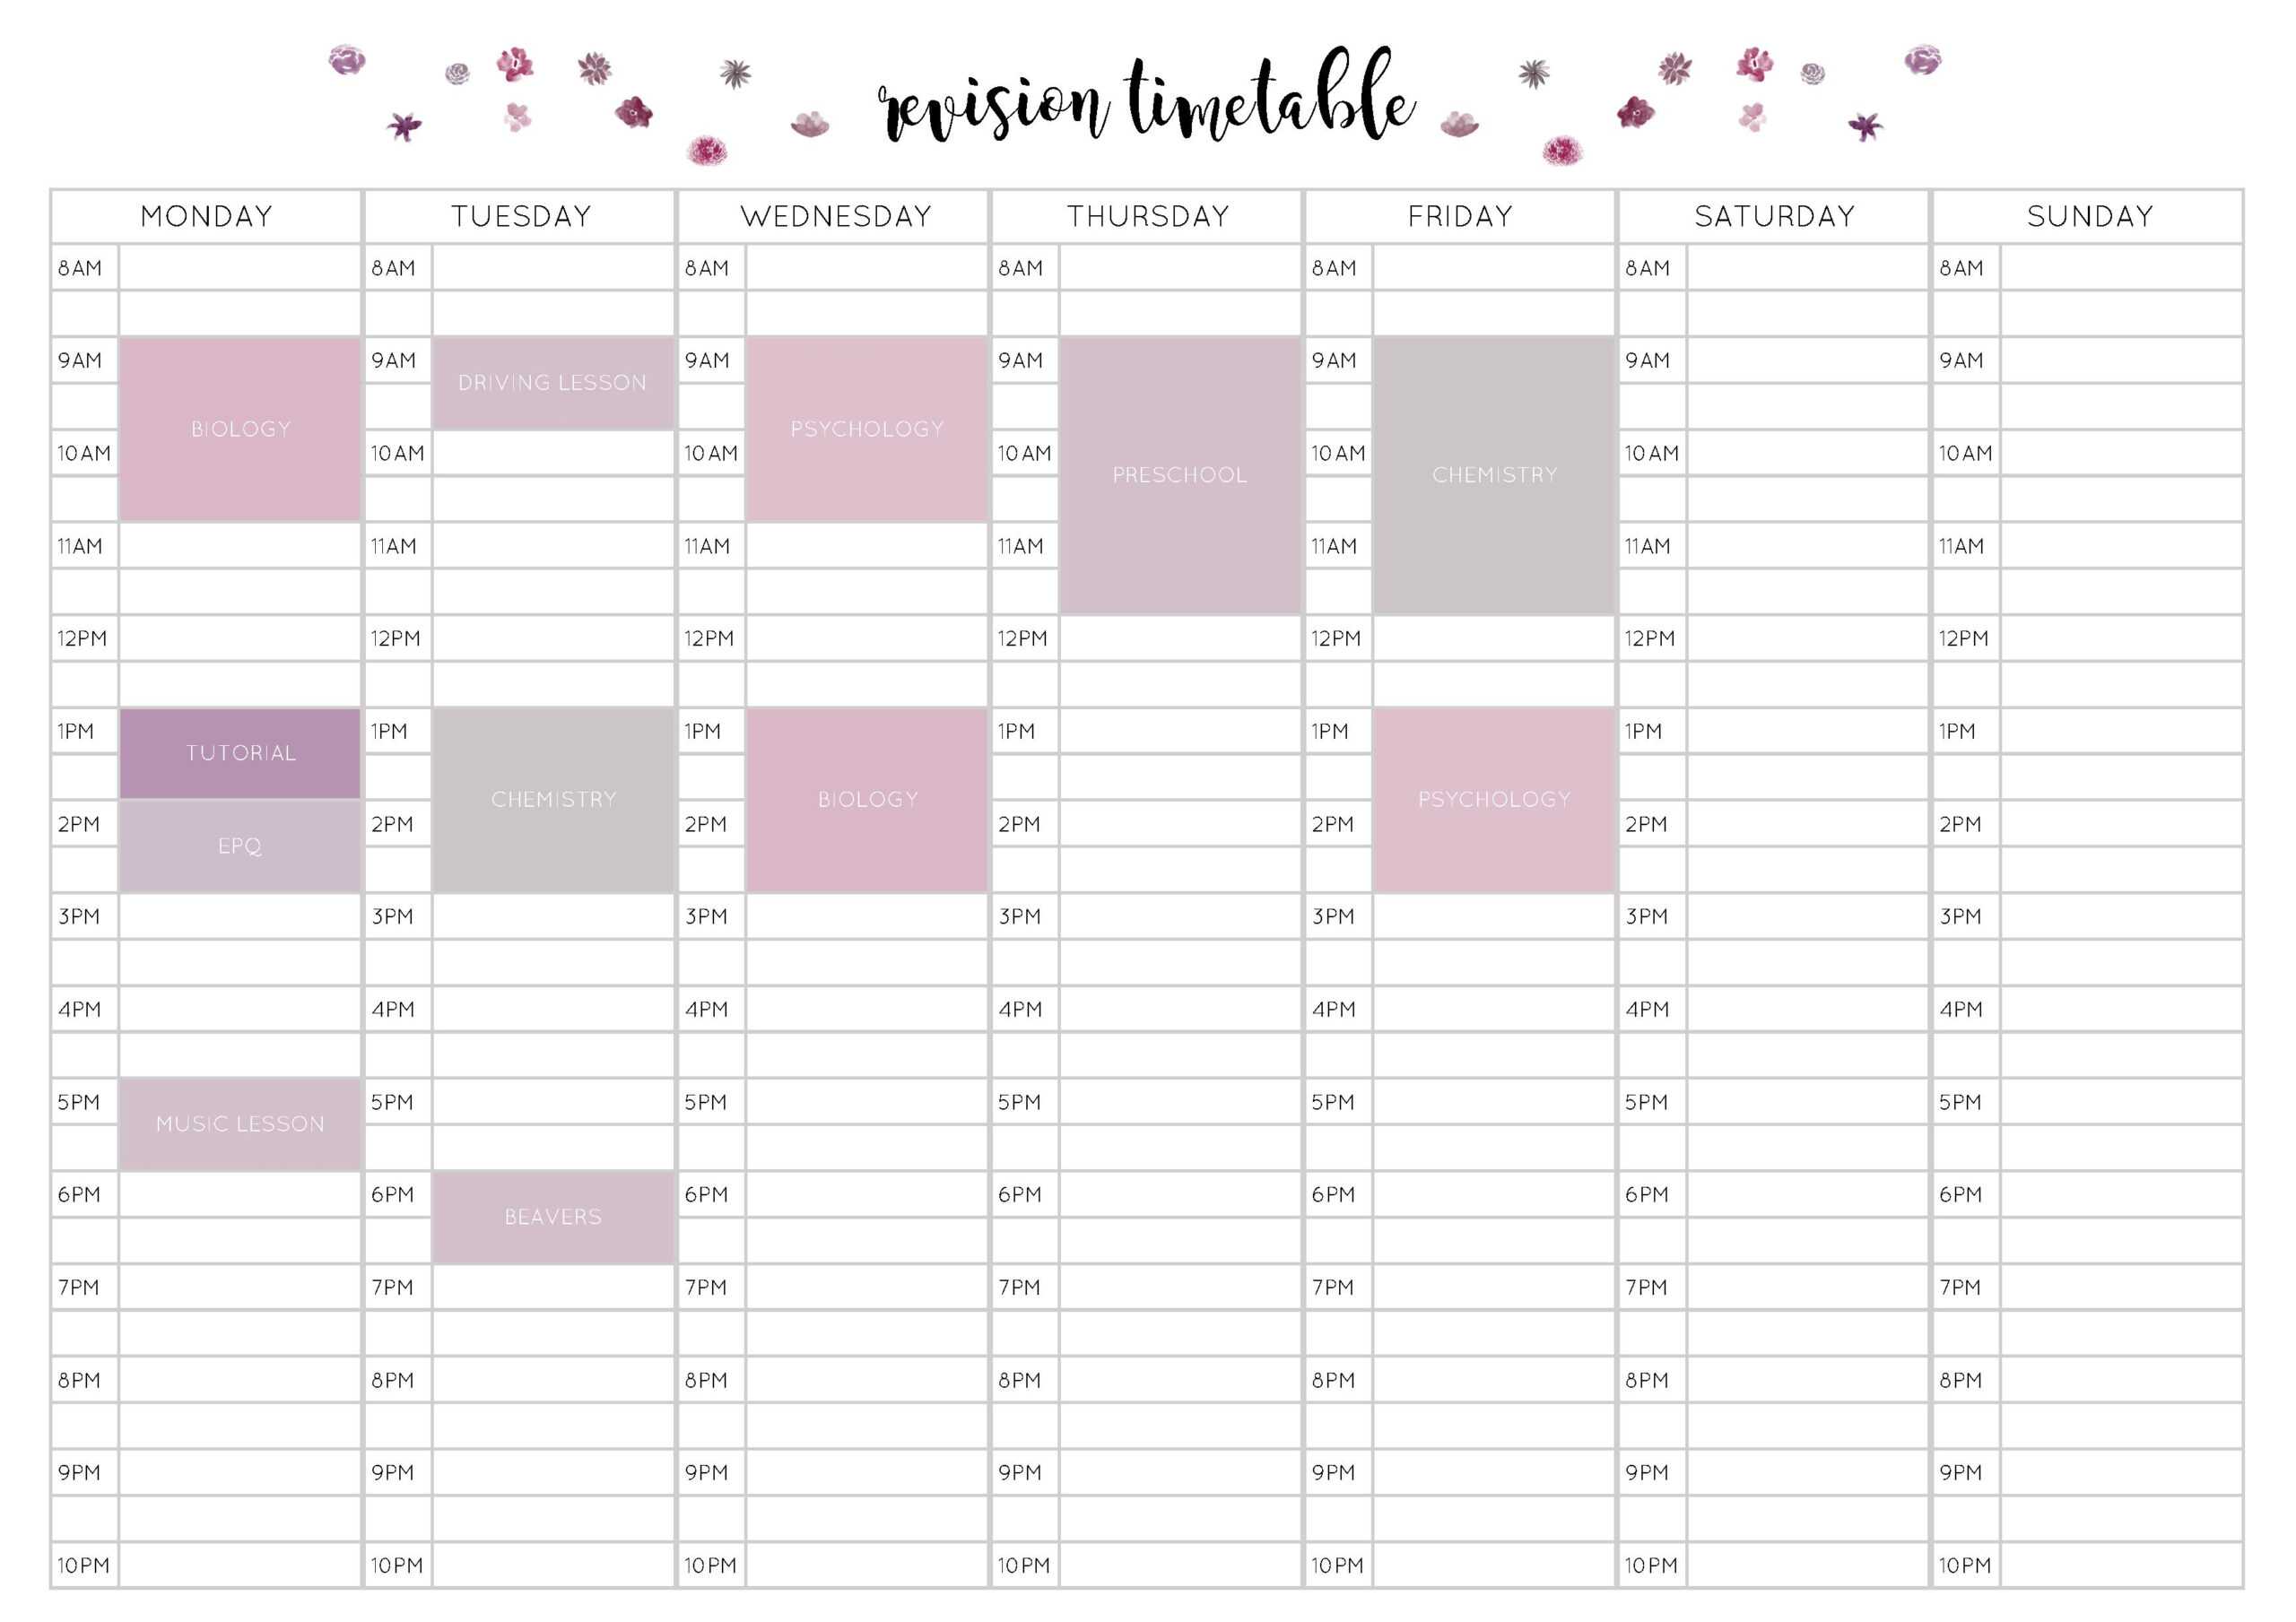 A Level Revision Timetable Template - Calep.midnightpig.co With Regard To Blank Revision Timetable Template